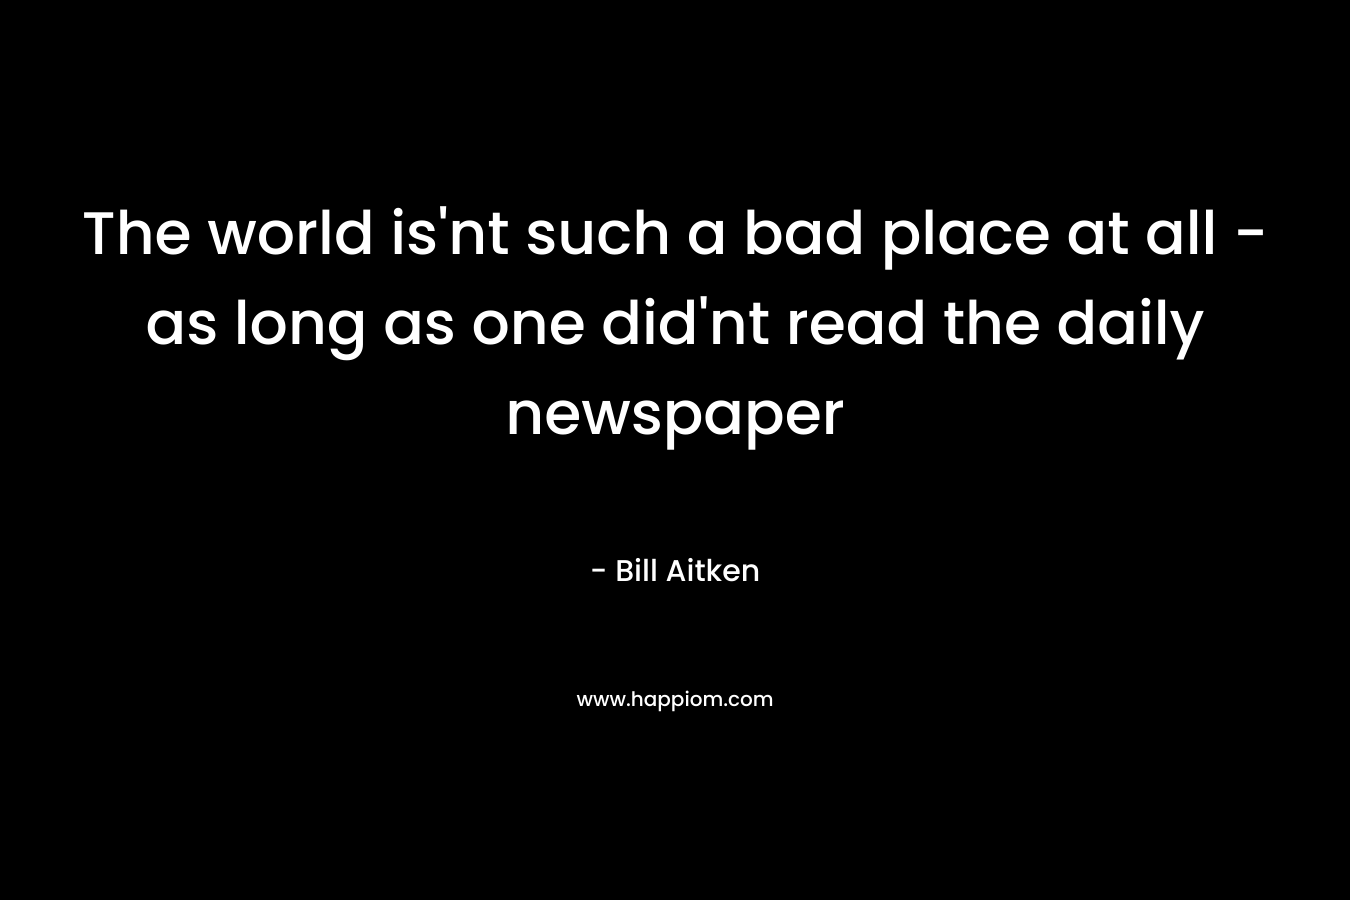 The world is'nt such a bad place at all - as long as one did'nt read the daily newspaper